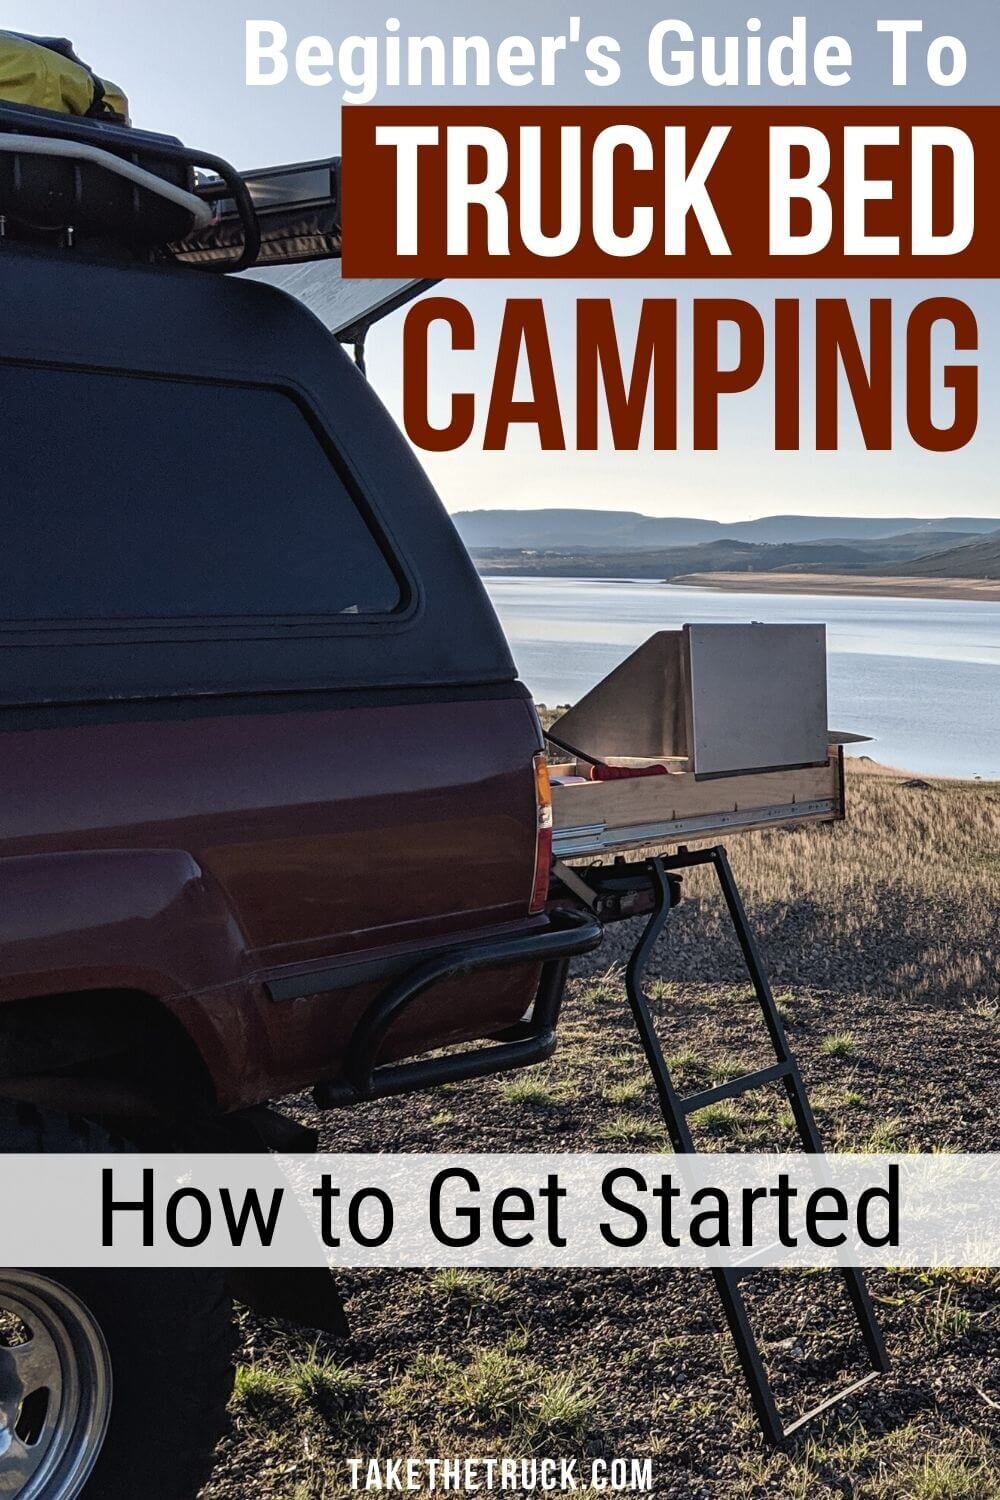 This post is full of all you need to get started truck bed camping or truck shell camping from your pickup - truck camping ideas, simple setup tips, advice on wild camping, plus more!